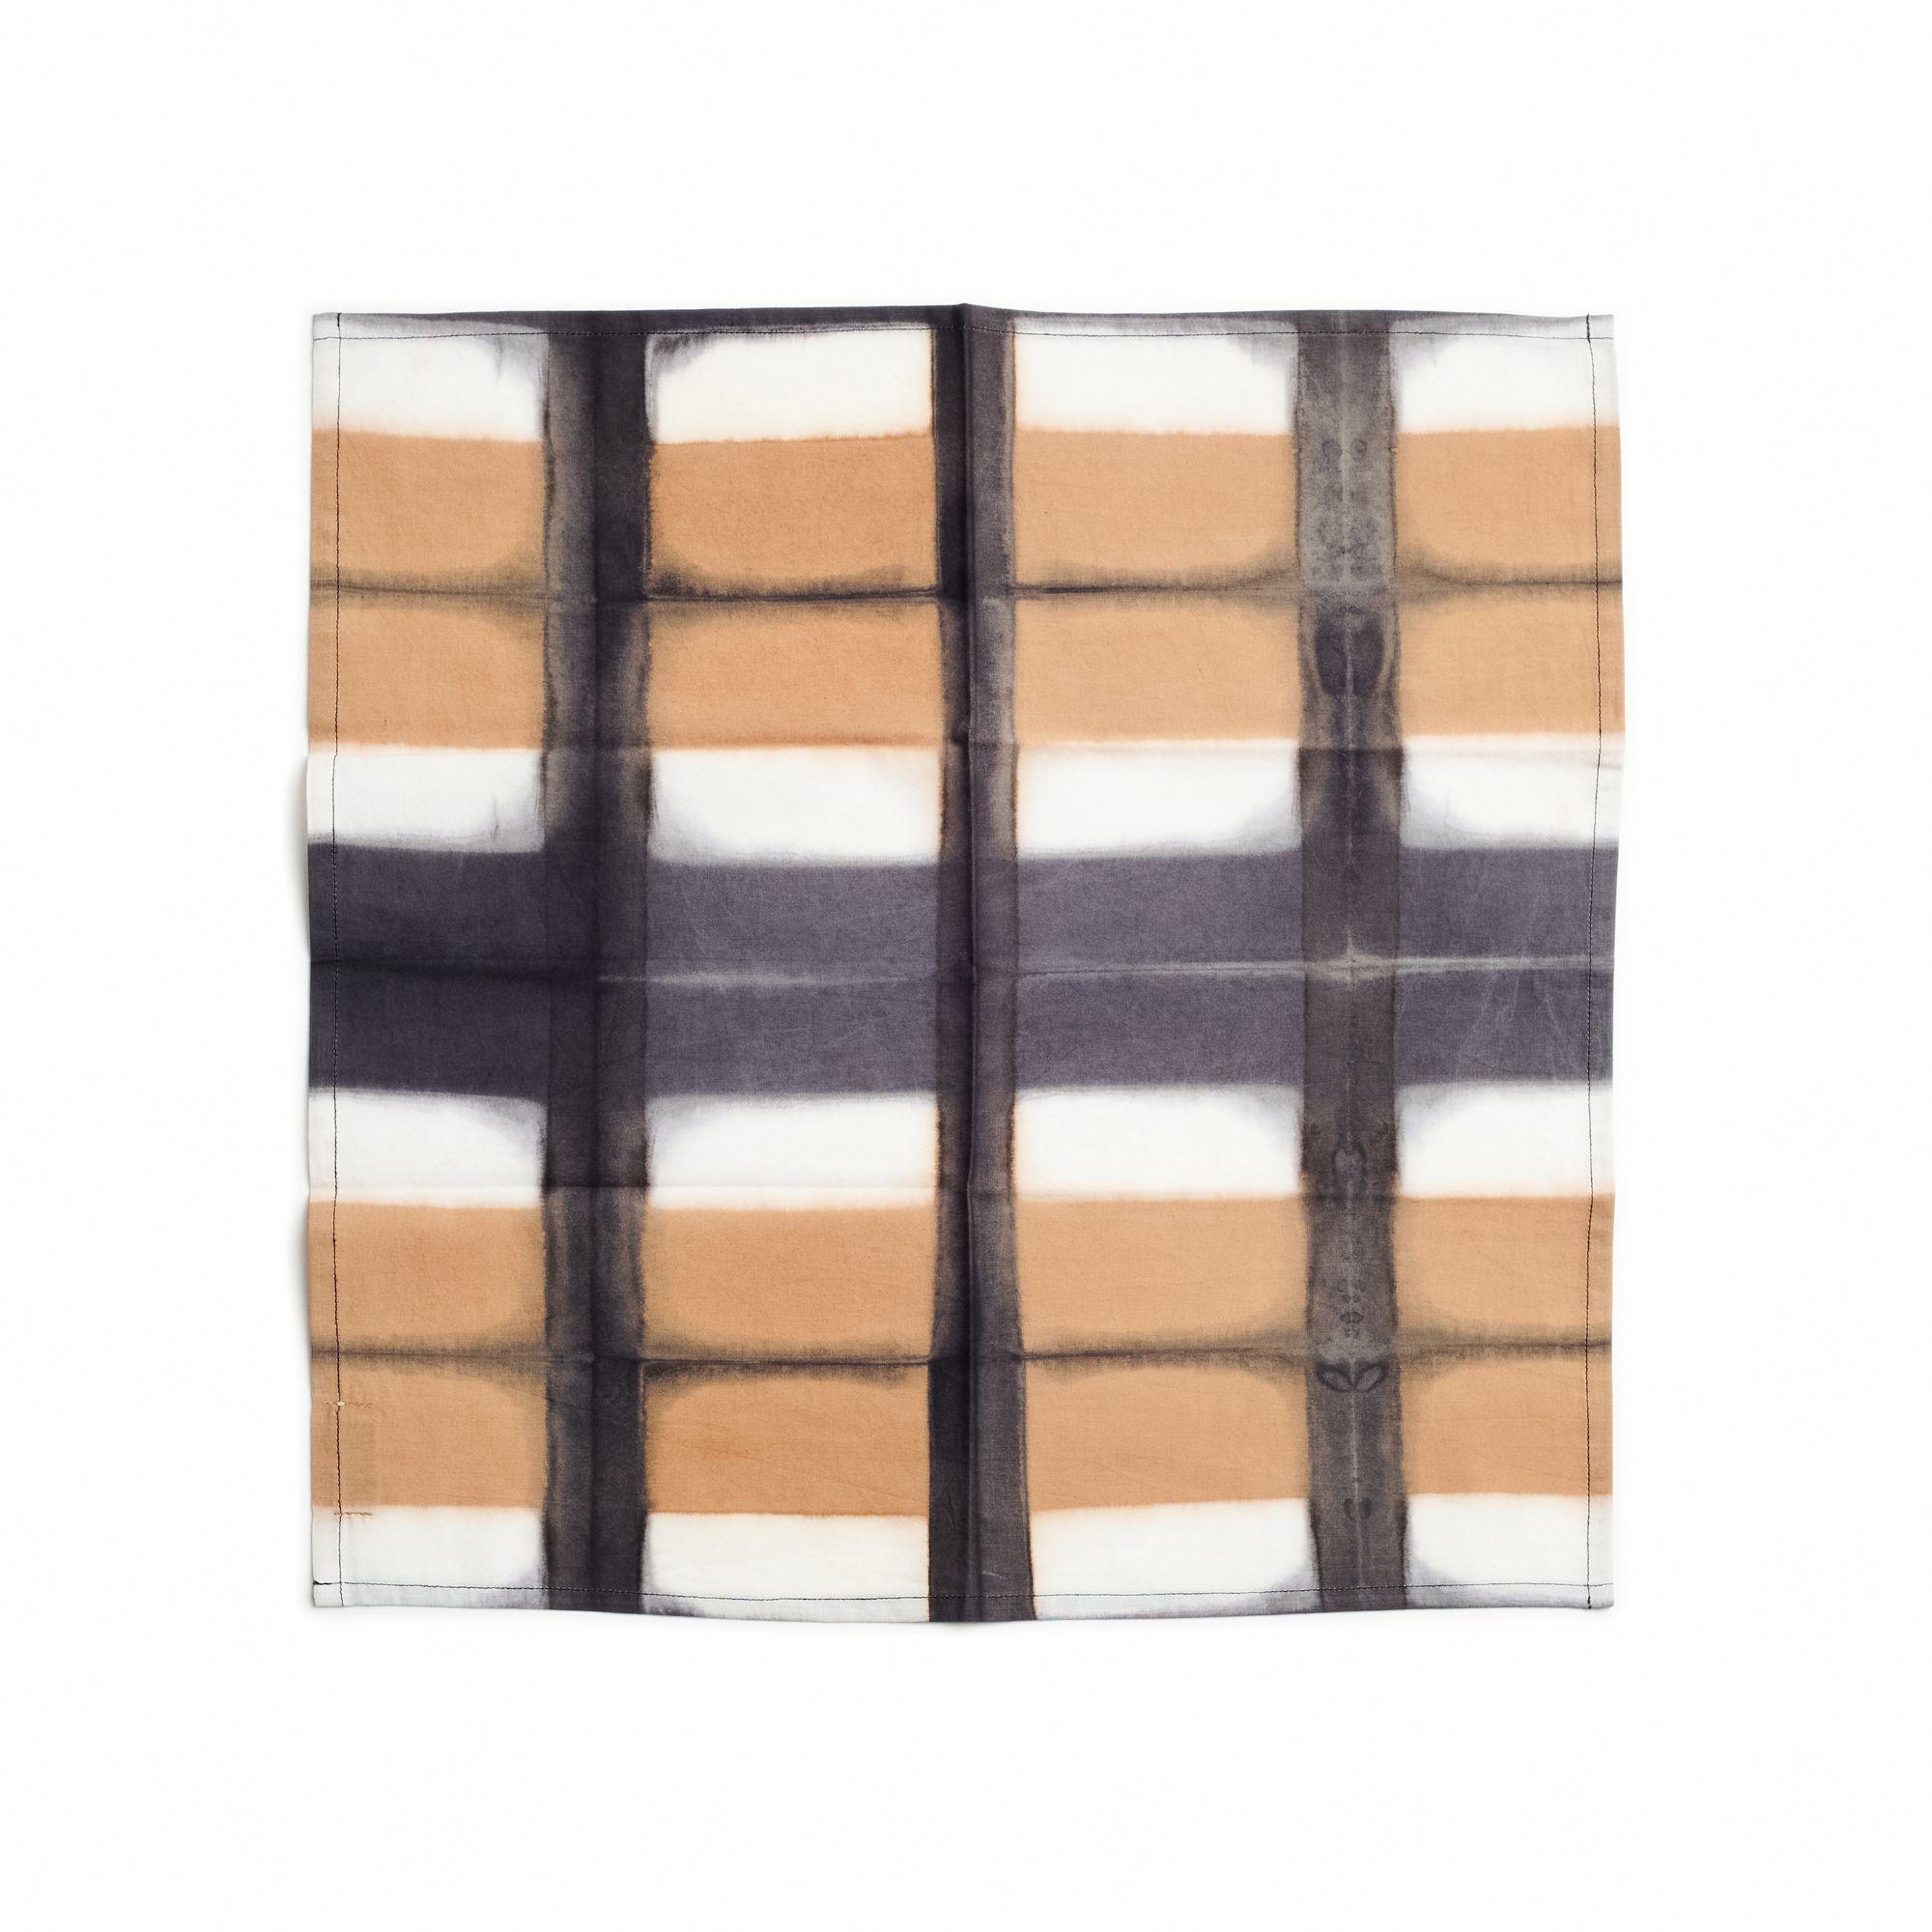 Chowk  table napkin is a unique artisanal napkin. Created artistically and ethically by artisans in India using clamp dye technique, using only pure natural dyes. It is a pure statement piece that adds modern and timeless quality as a table ware